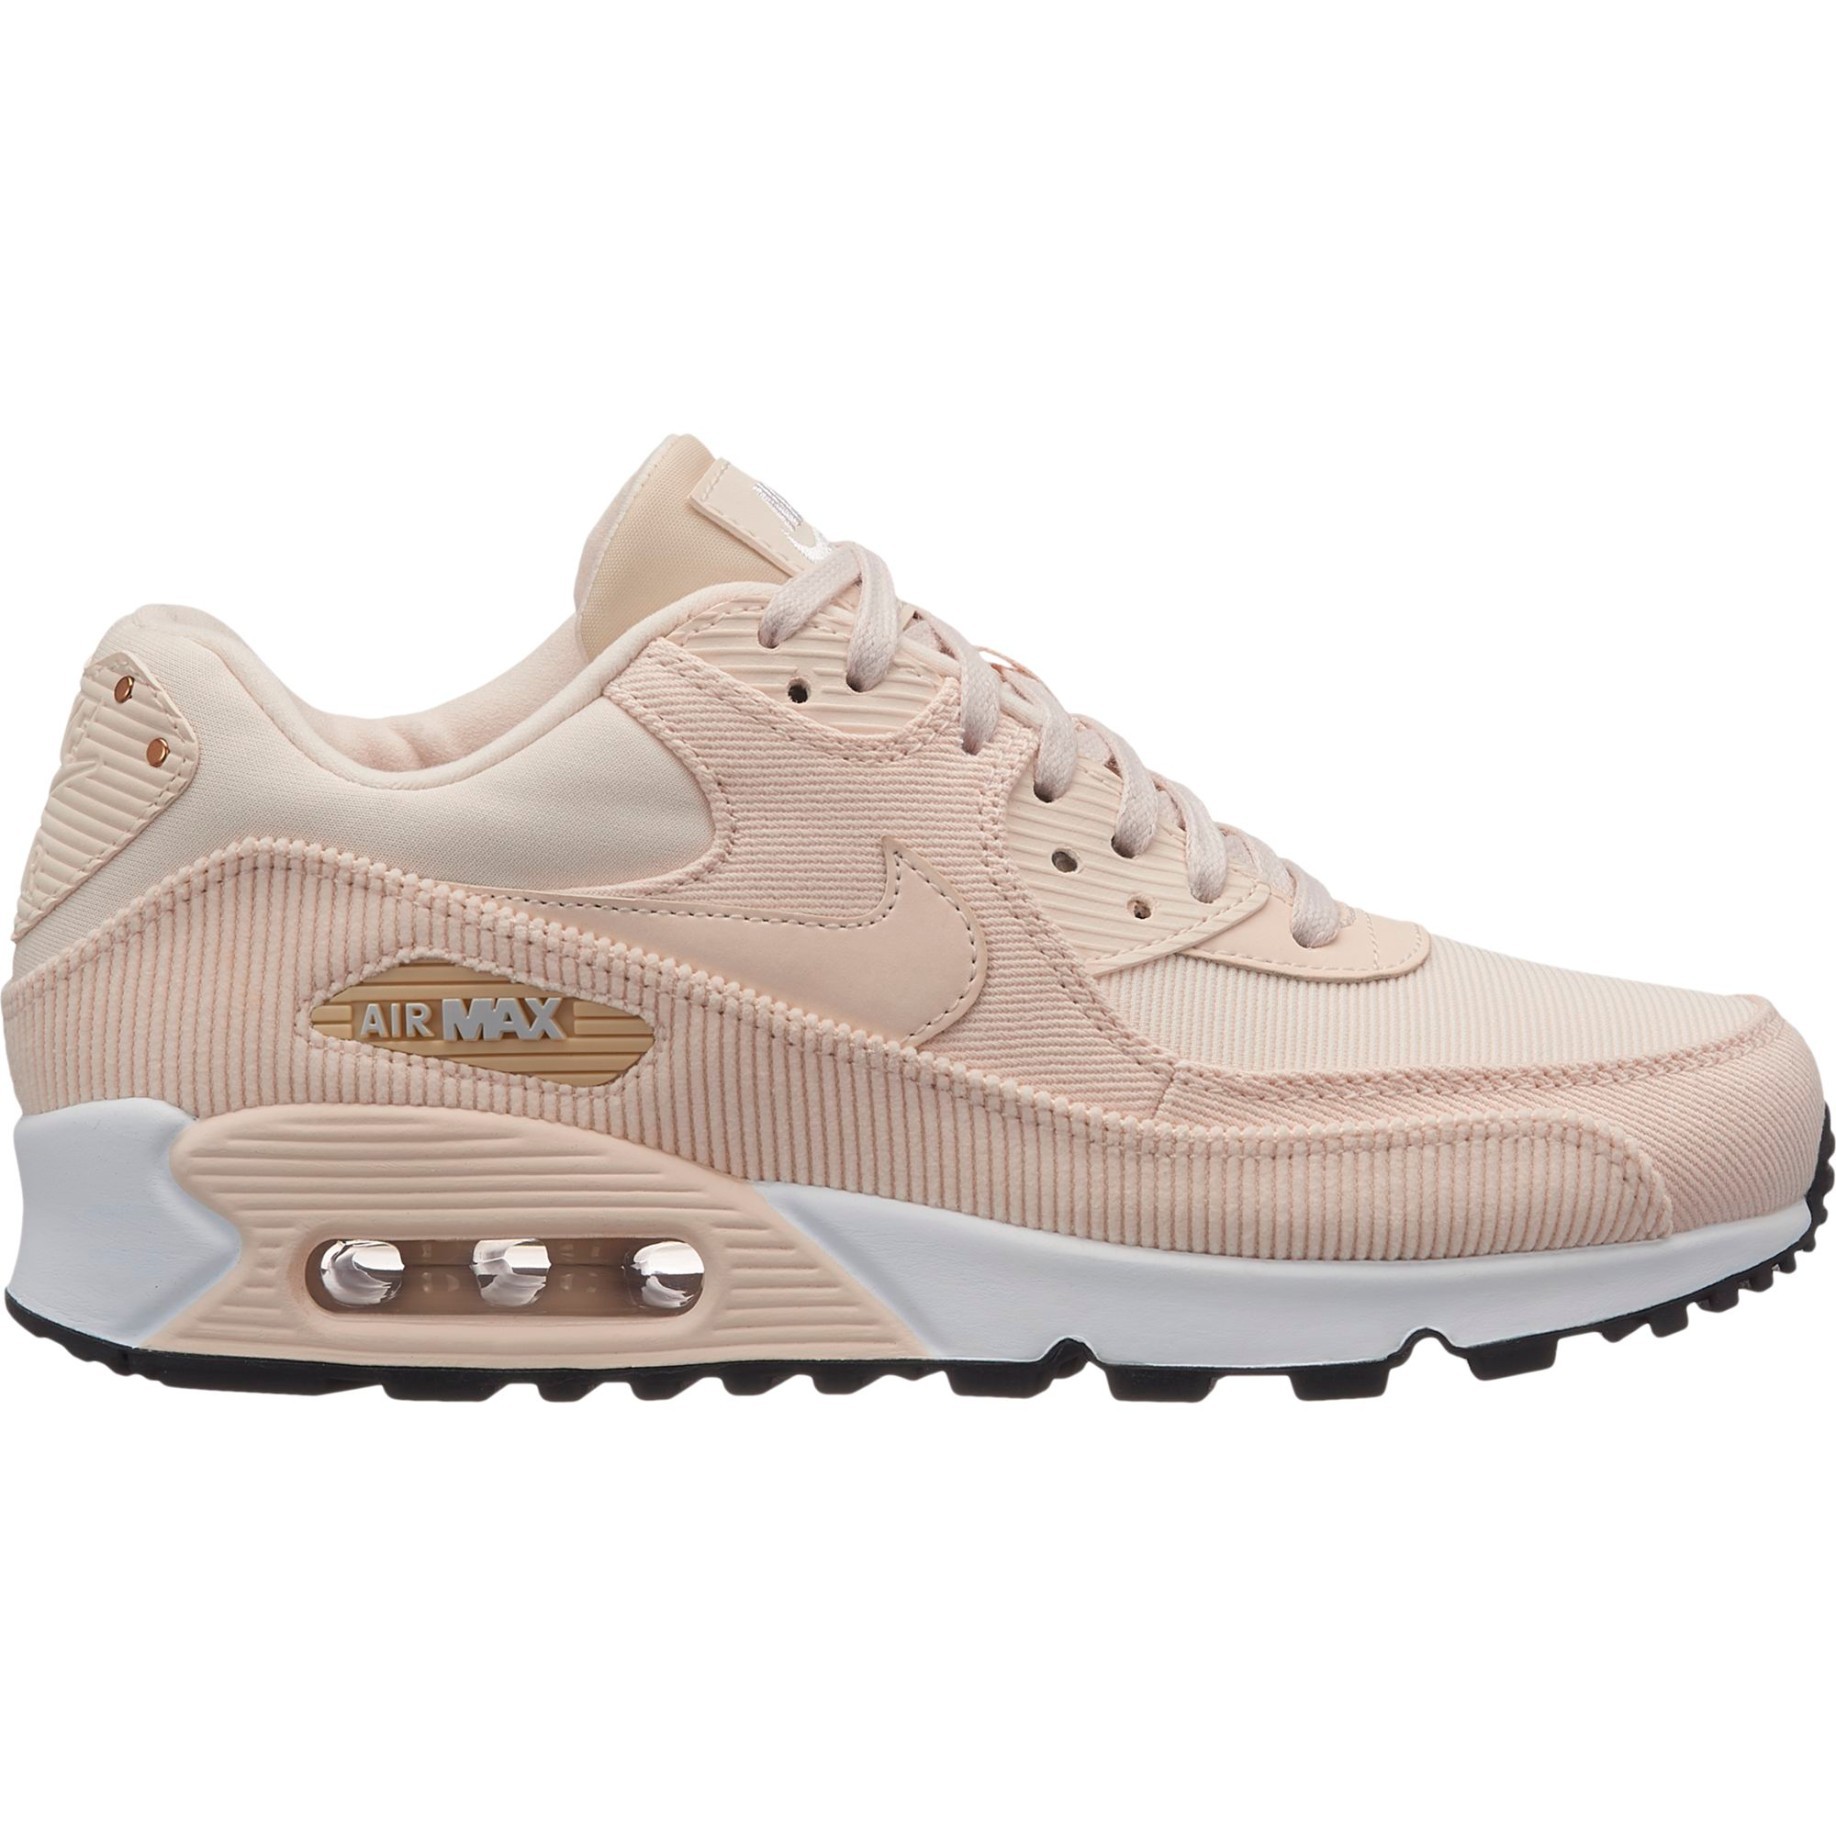 Shoes Woman Air Max 90 Leather